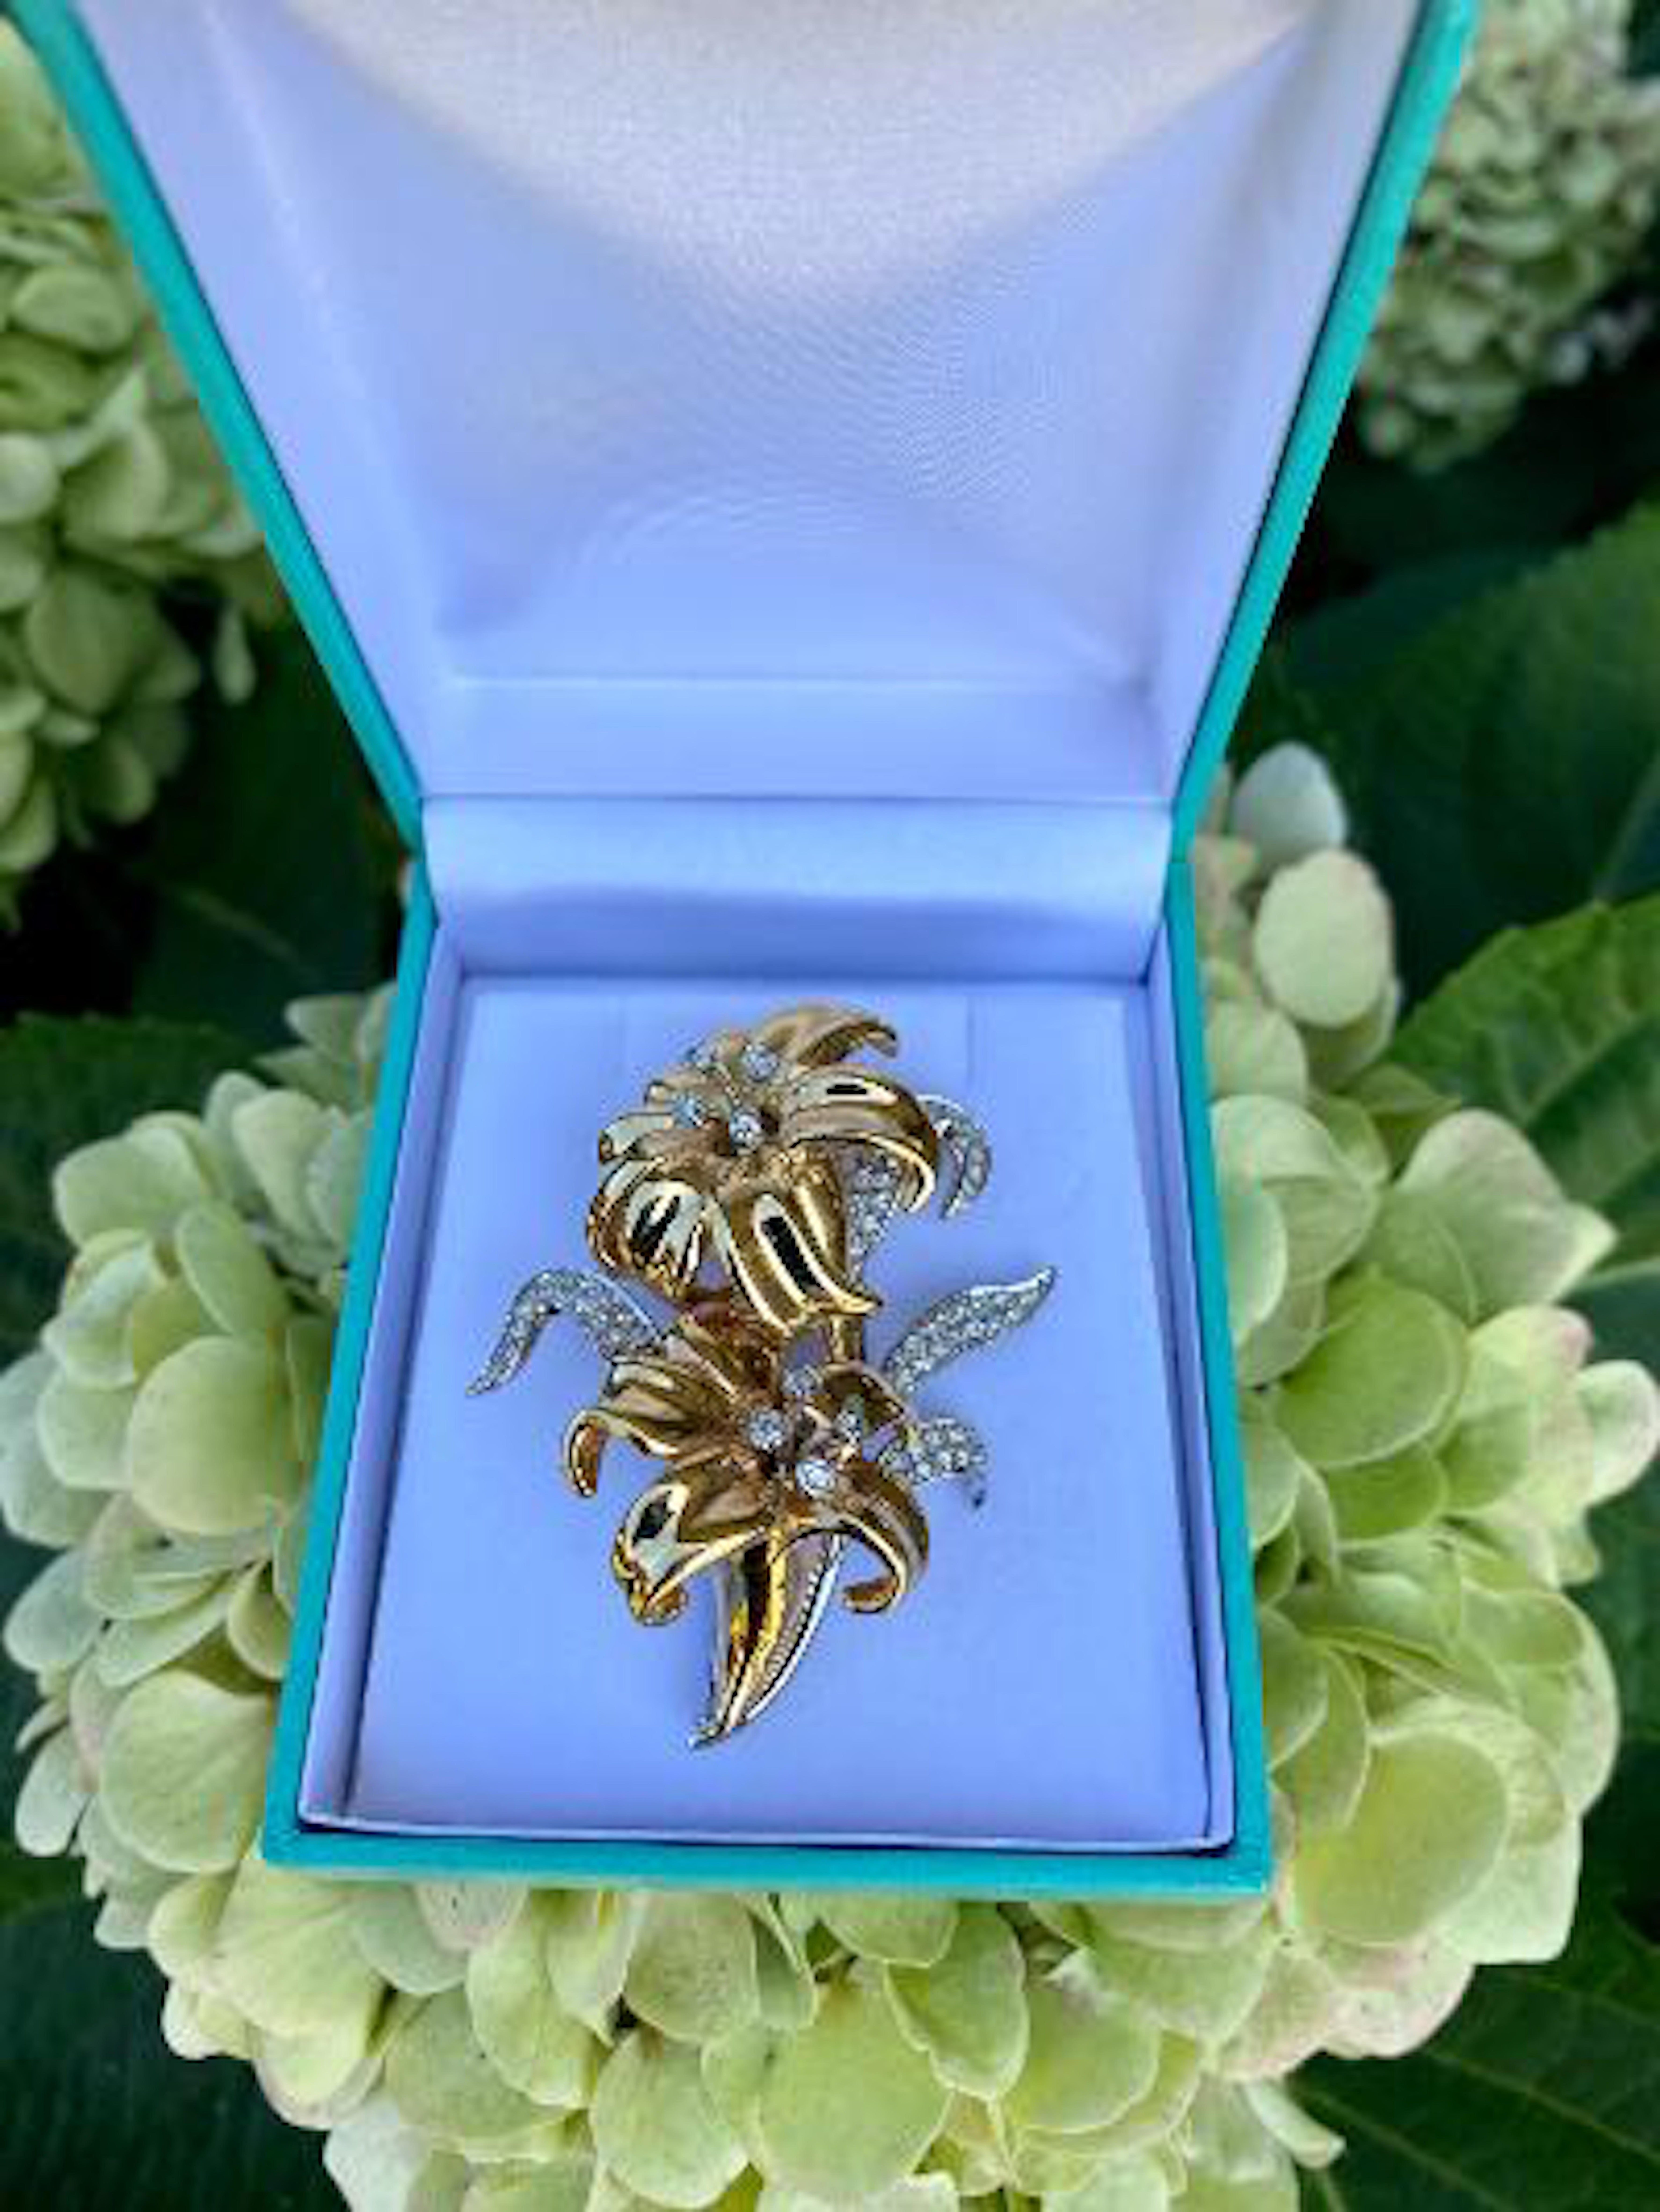 Beautiful hand made 18 karat yellow and white gold three dimensional estate lily flower brooch is a realistic work of art.  Brooch features a gold carpel, diamond stamens and shimmering pave diamond leaves. Approximately 69 round brilliant diamonds